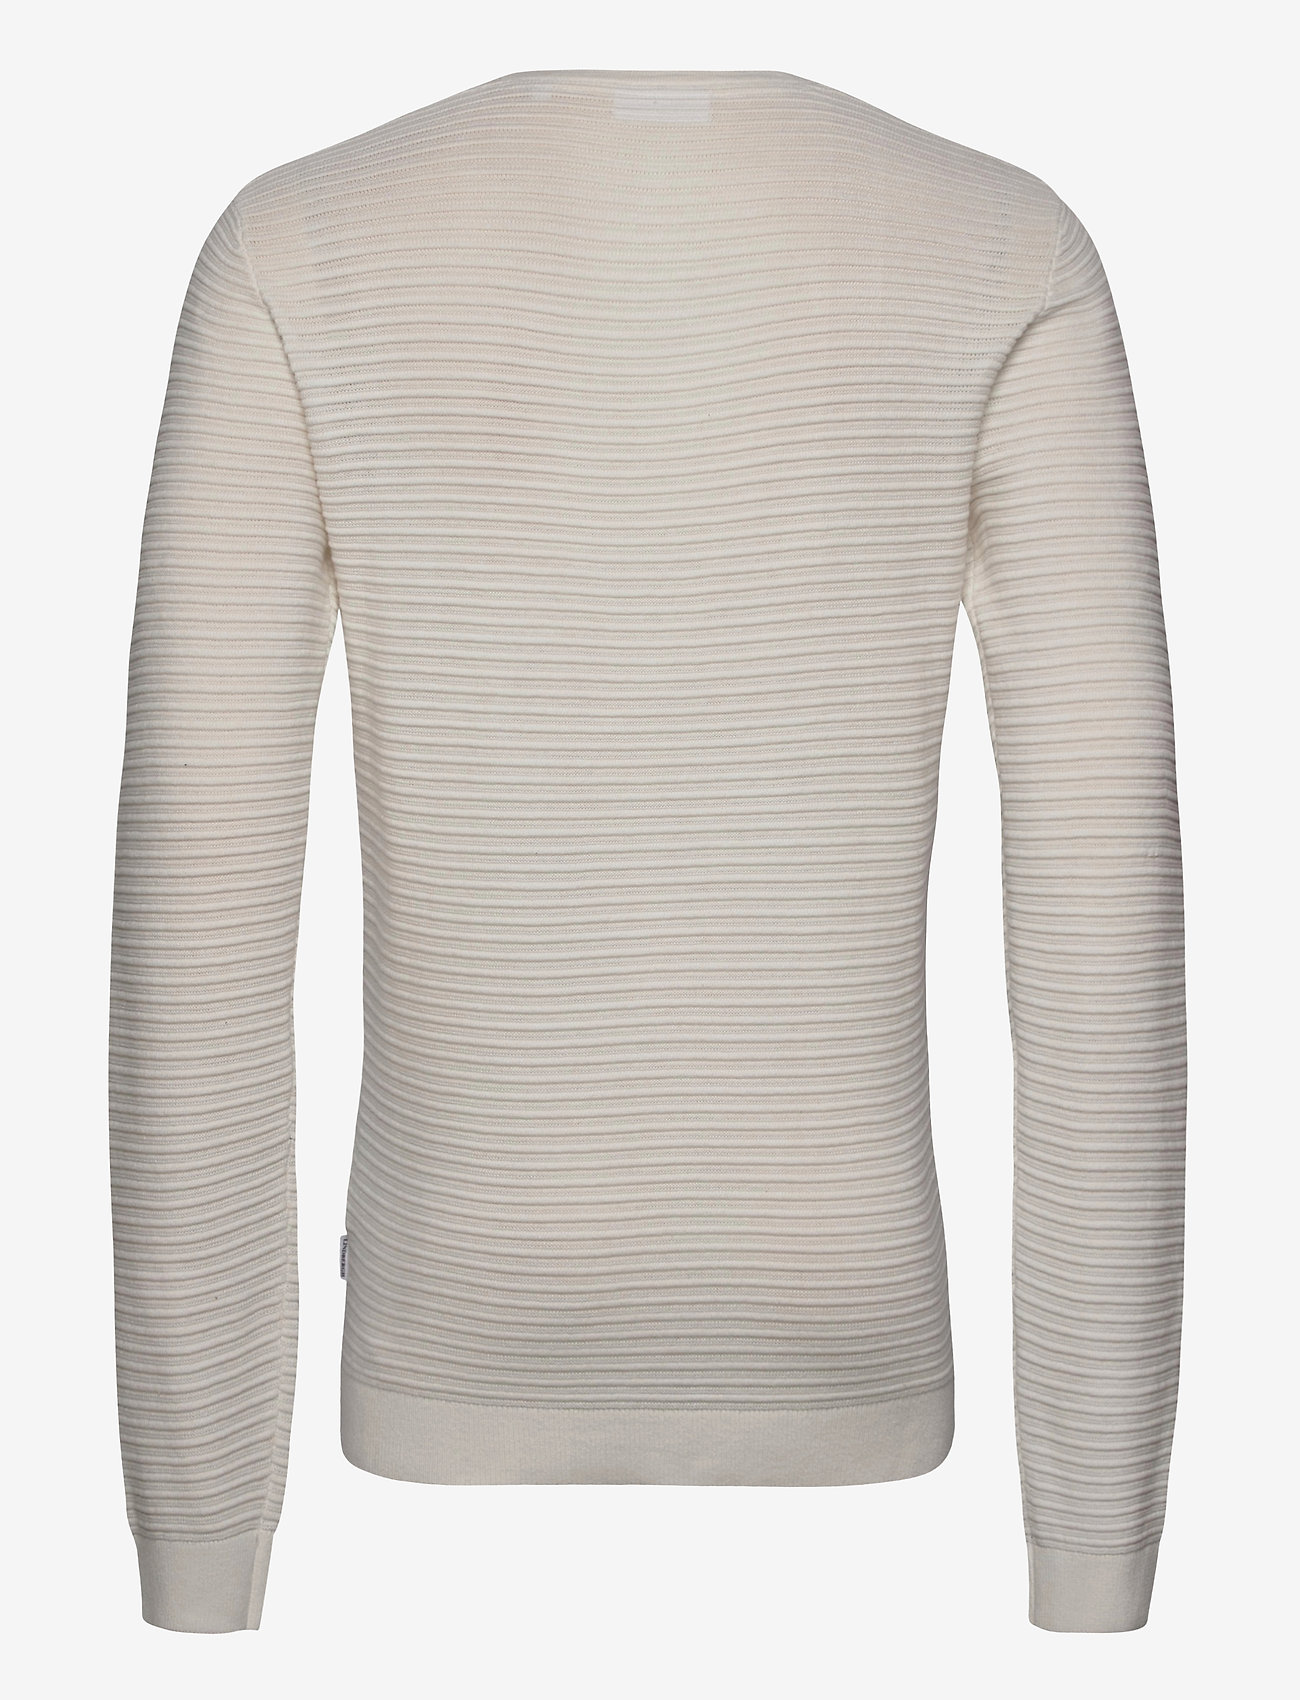 Lindbergh - Structure knit - basic-strickmode - off white - 1